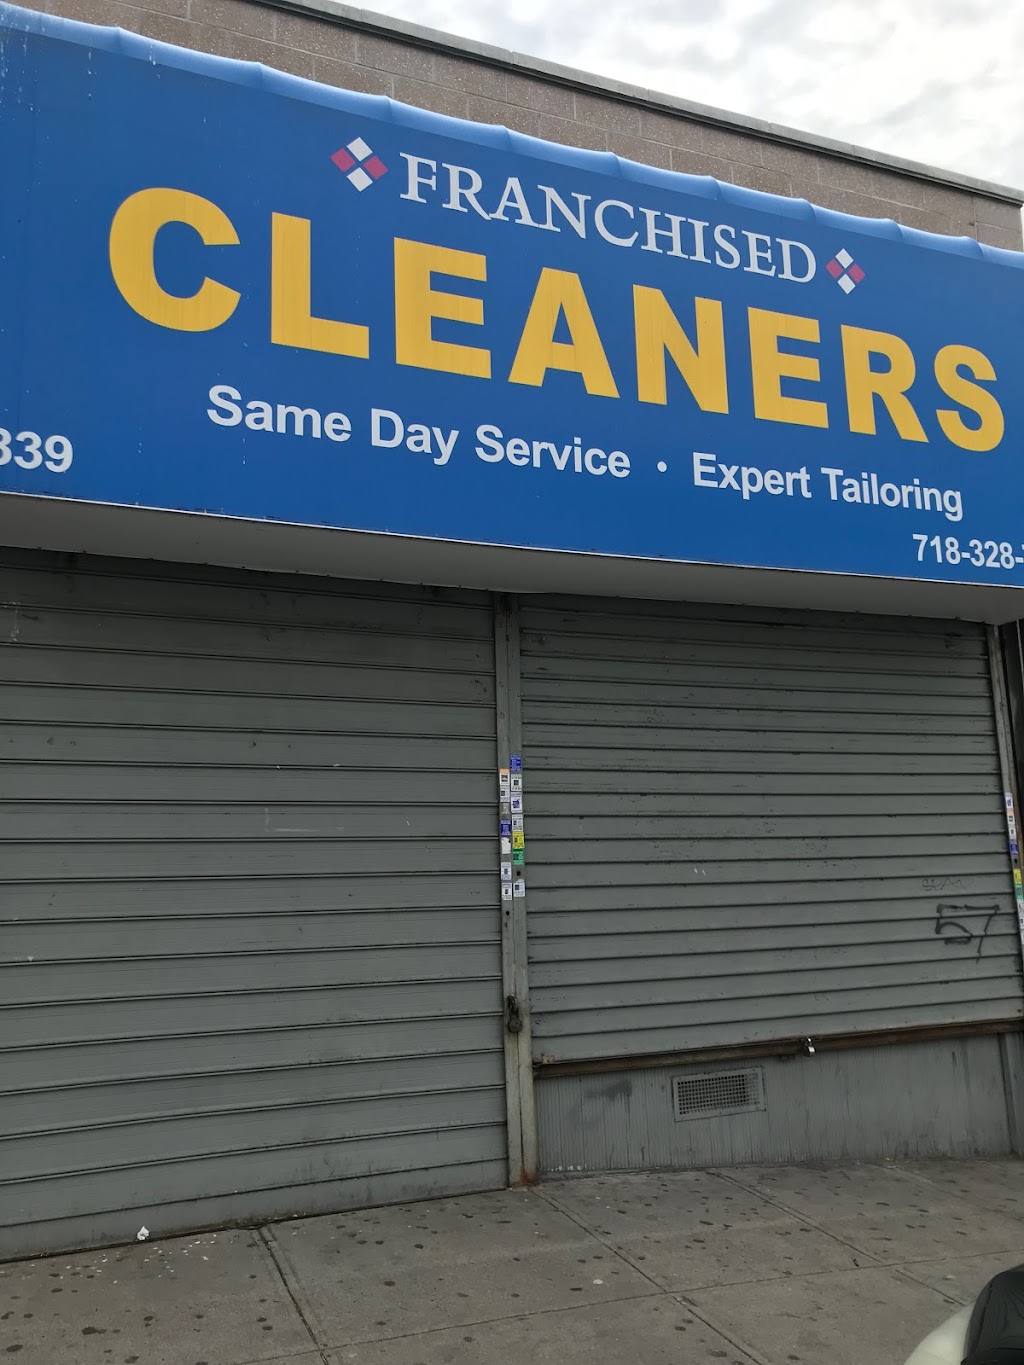 Joo Franchise Cleaners | 839 Soundview Ave, The Bronx, NY 10473 | Phone: (718) 328-7633